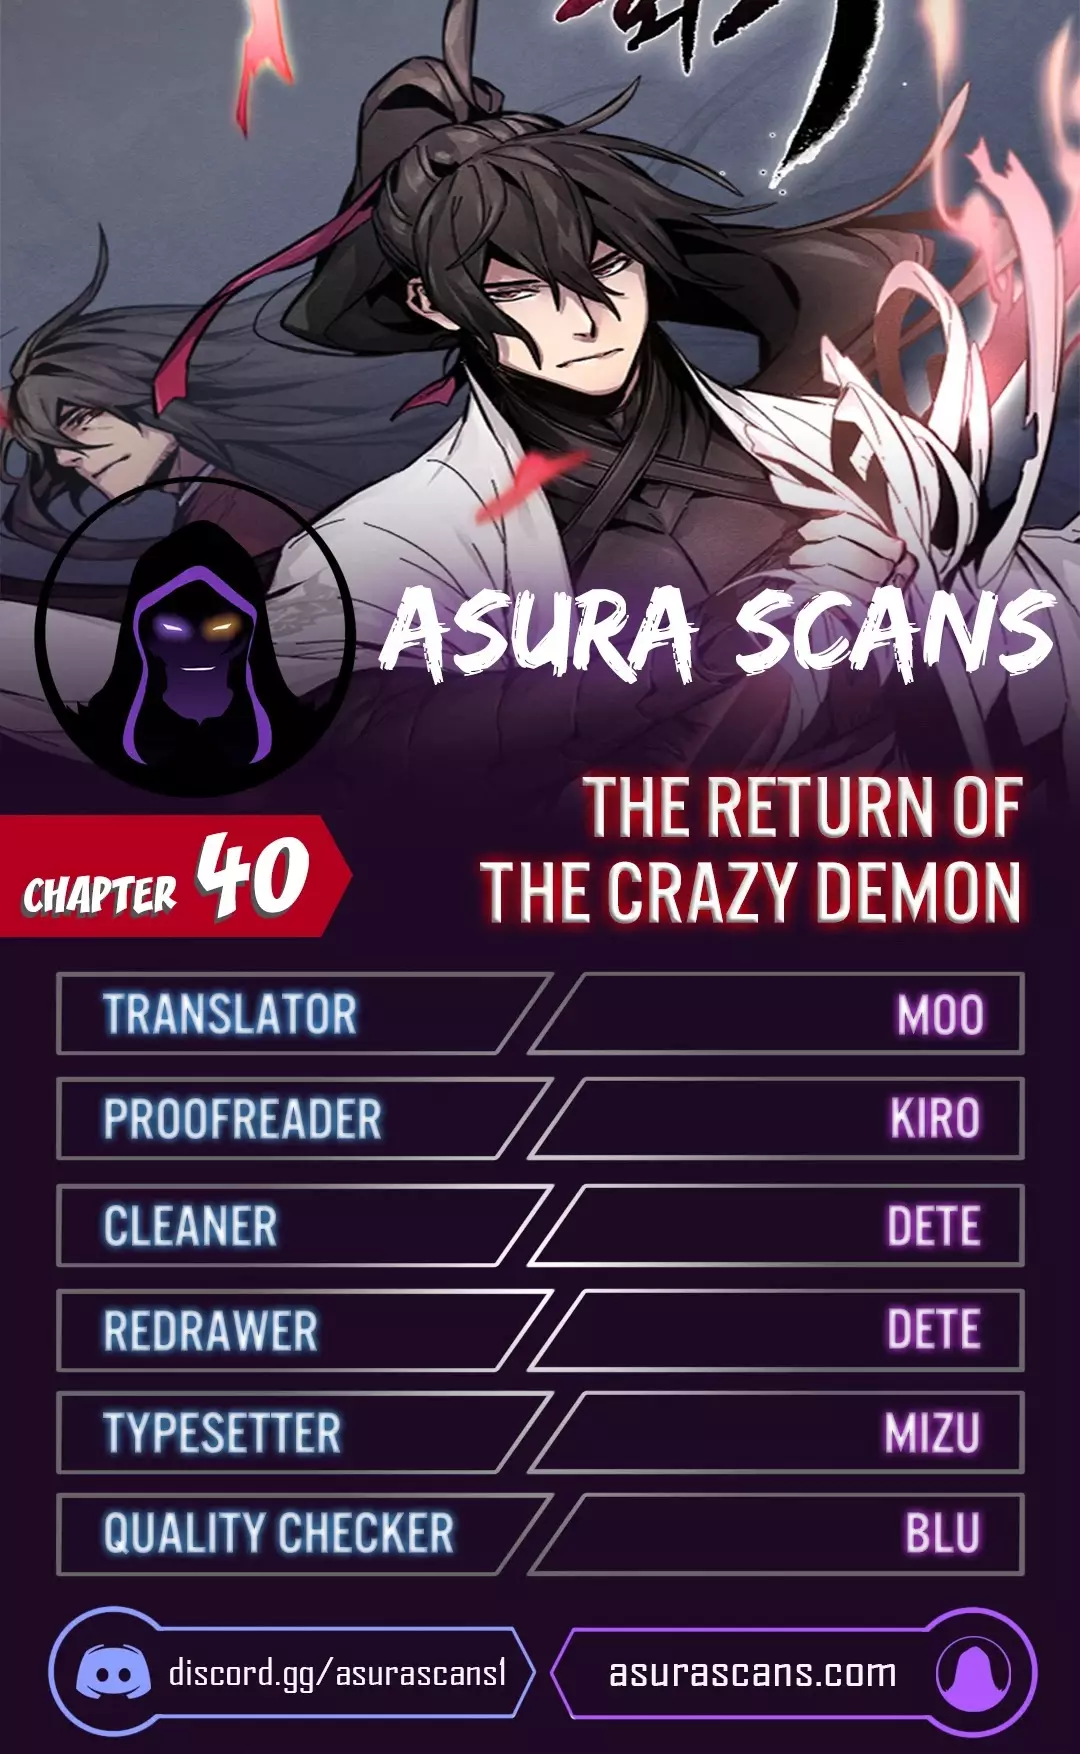 The Return Of The Crazy Demon - 40 page 1-40f7c666